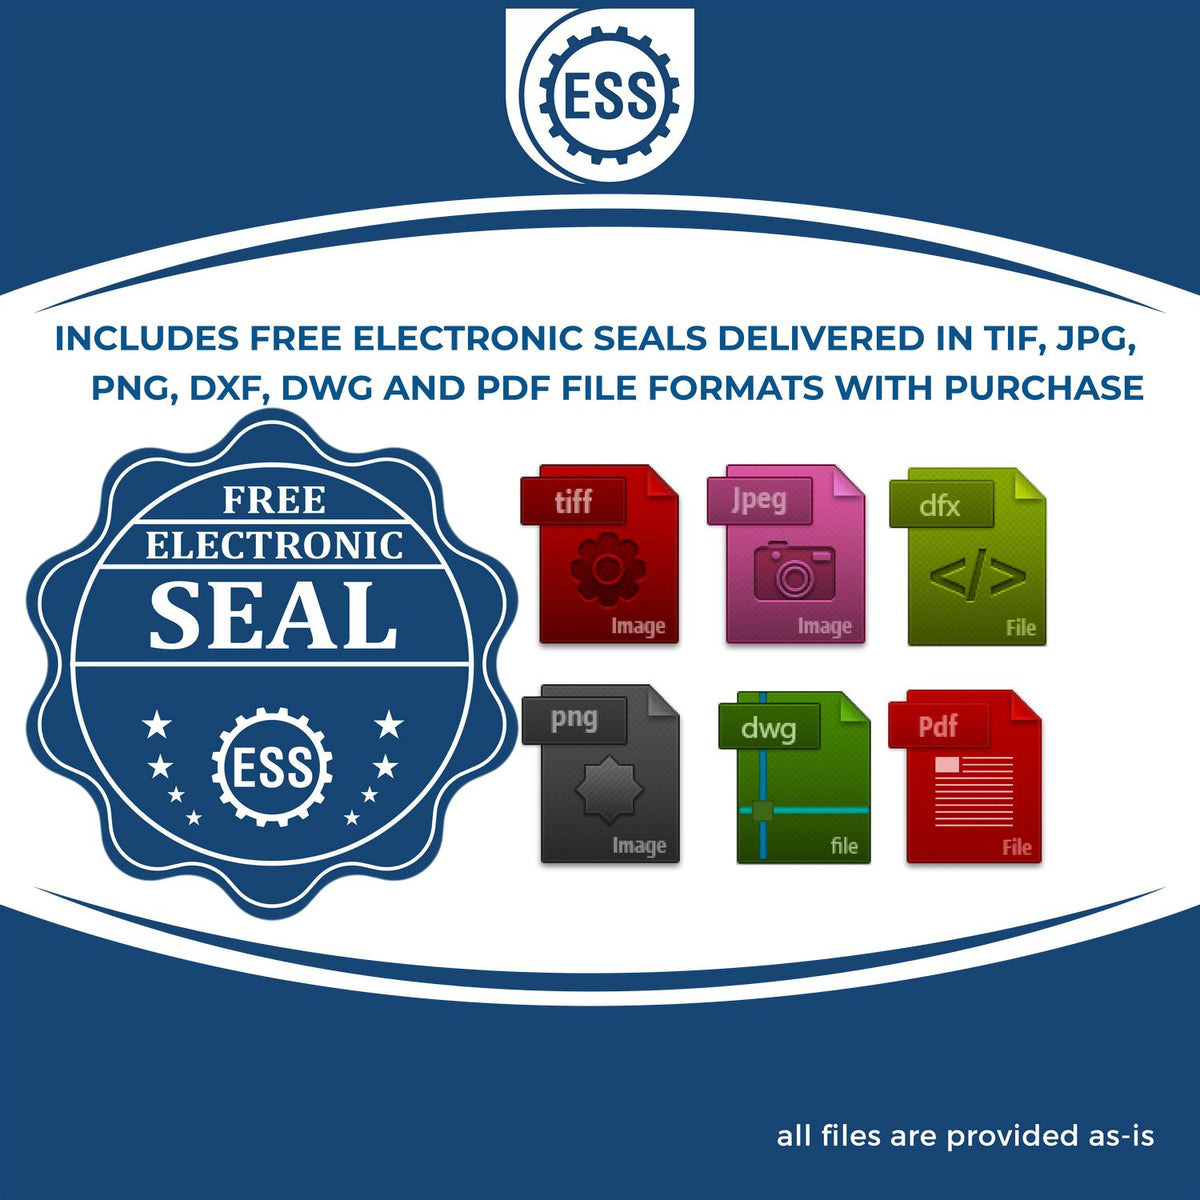 An infographic for the free electronic seal for the State of Massachusetts Extended Long Reach Geologist Seal illustrating the different file type icons such as DXF, DWG, TIF, JPG and PNG.